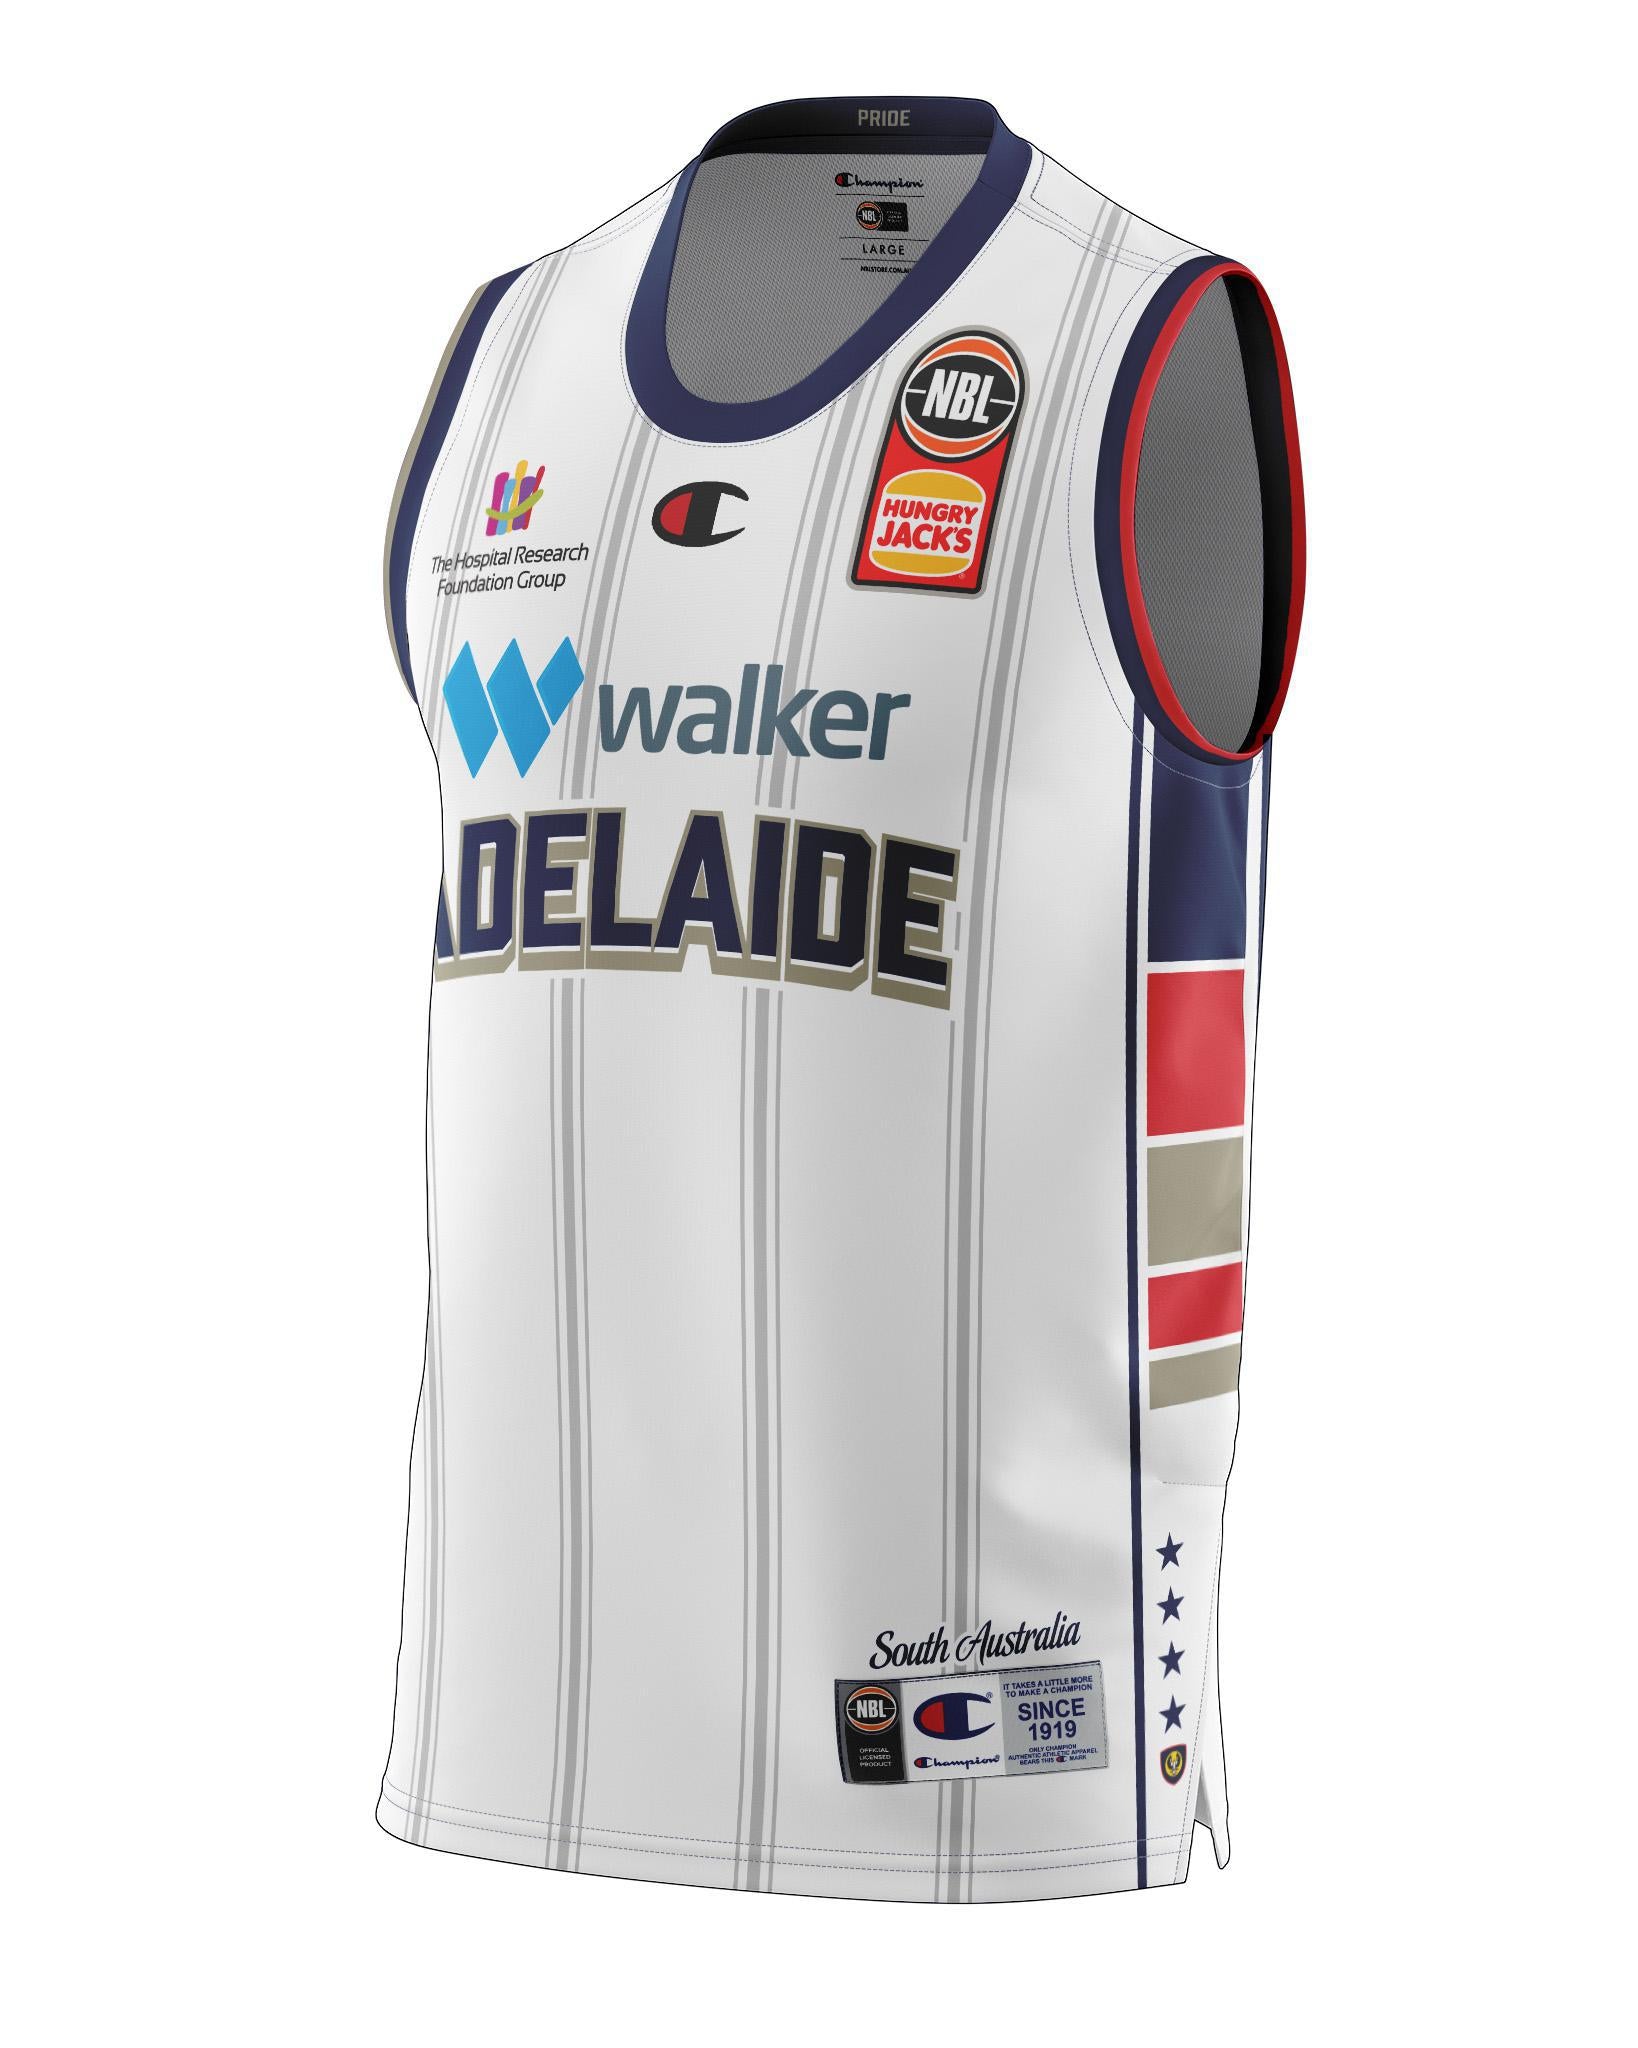 Adelaide 36ers 22/23 Heritage Jersey– Official NBL Store